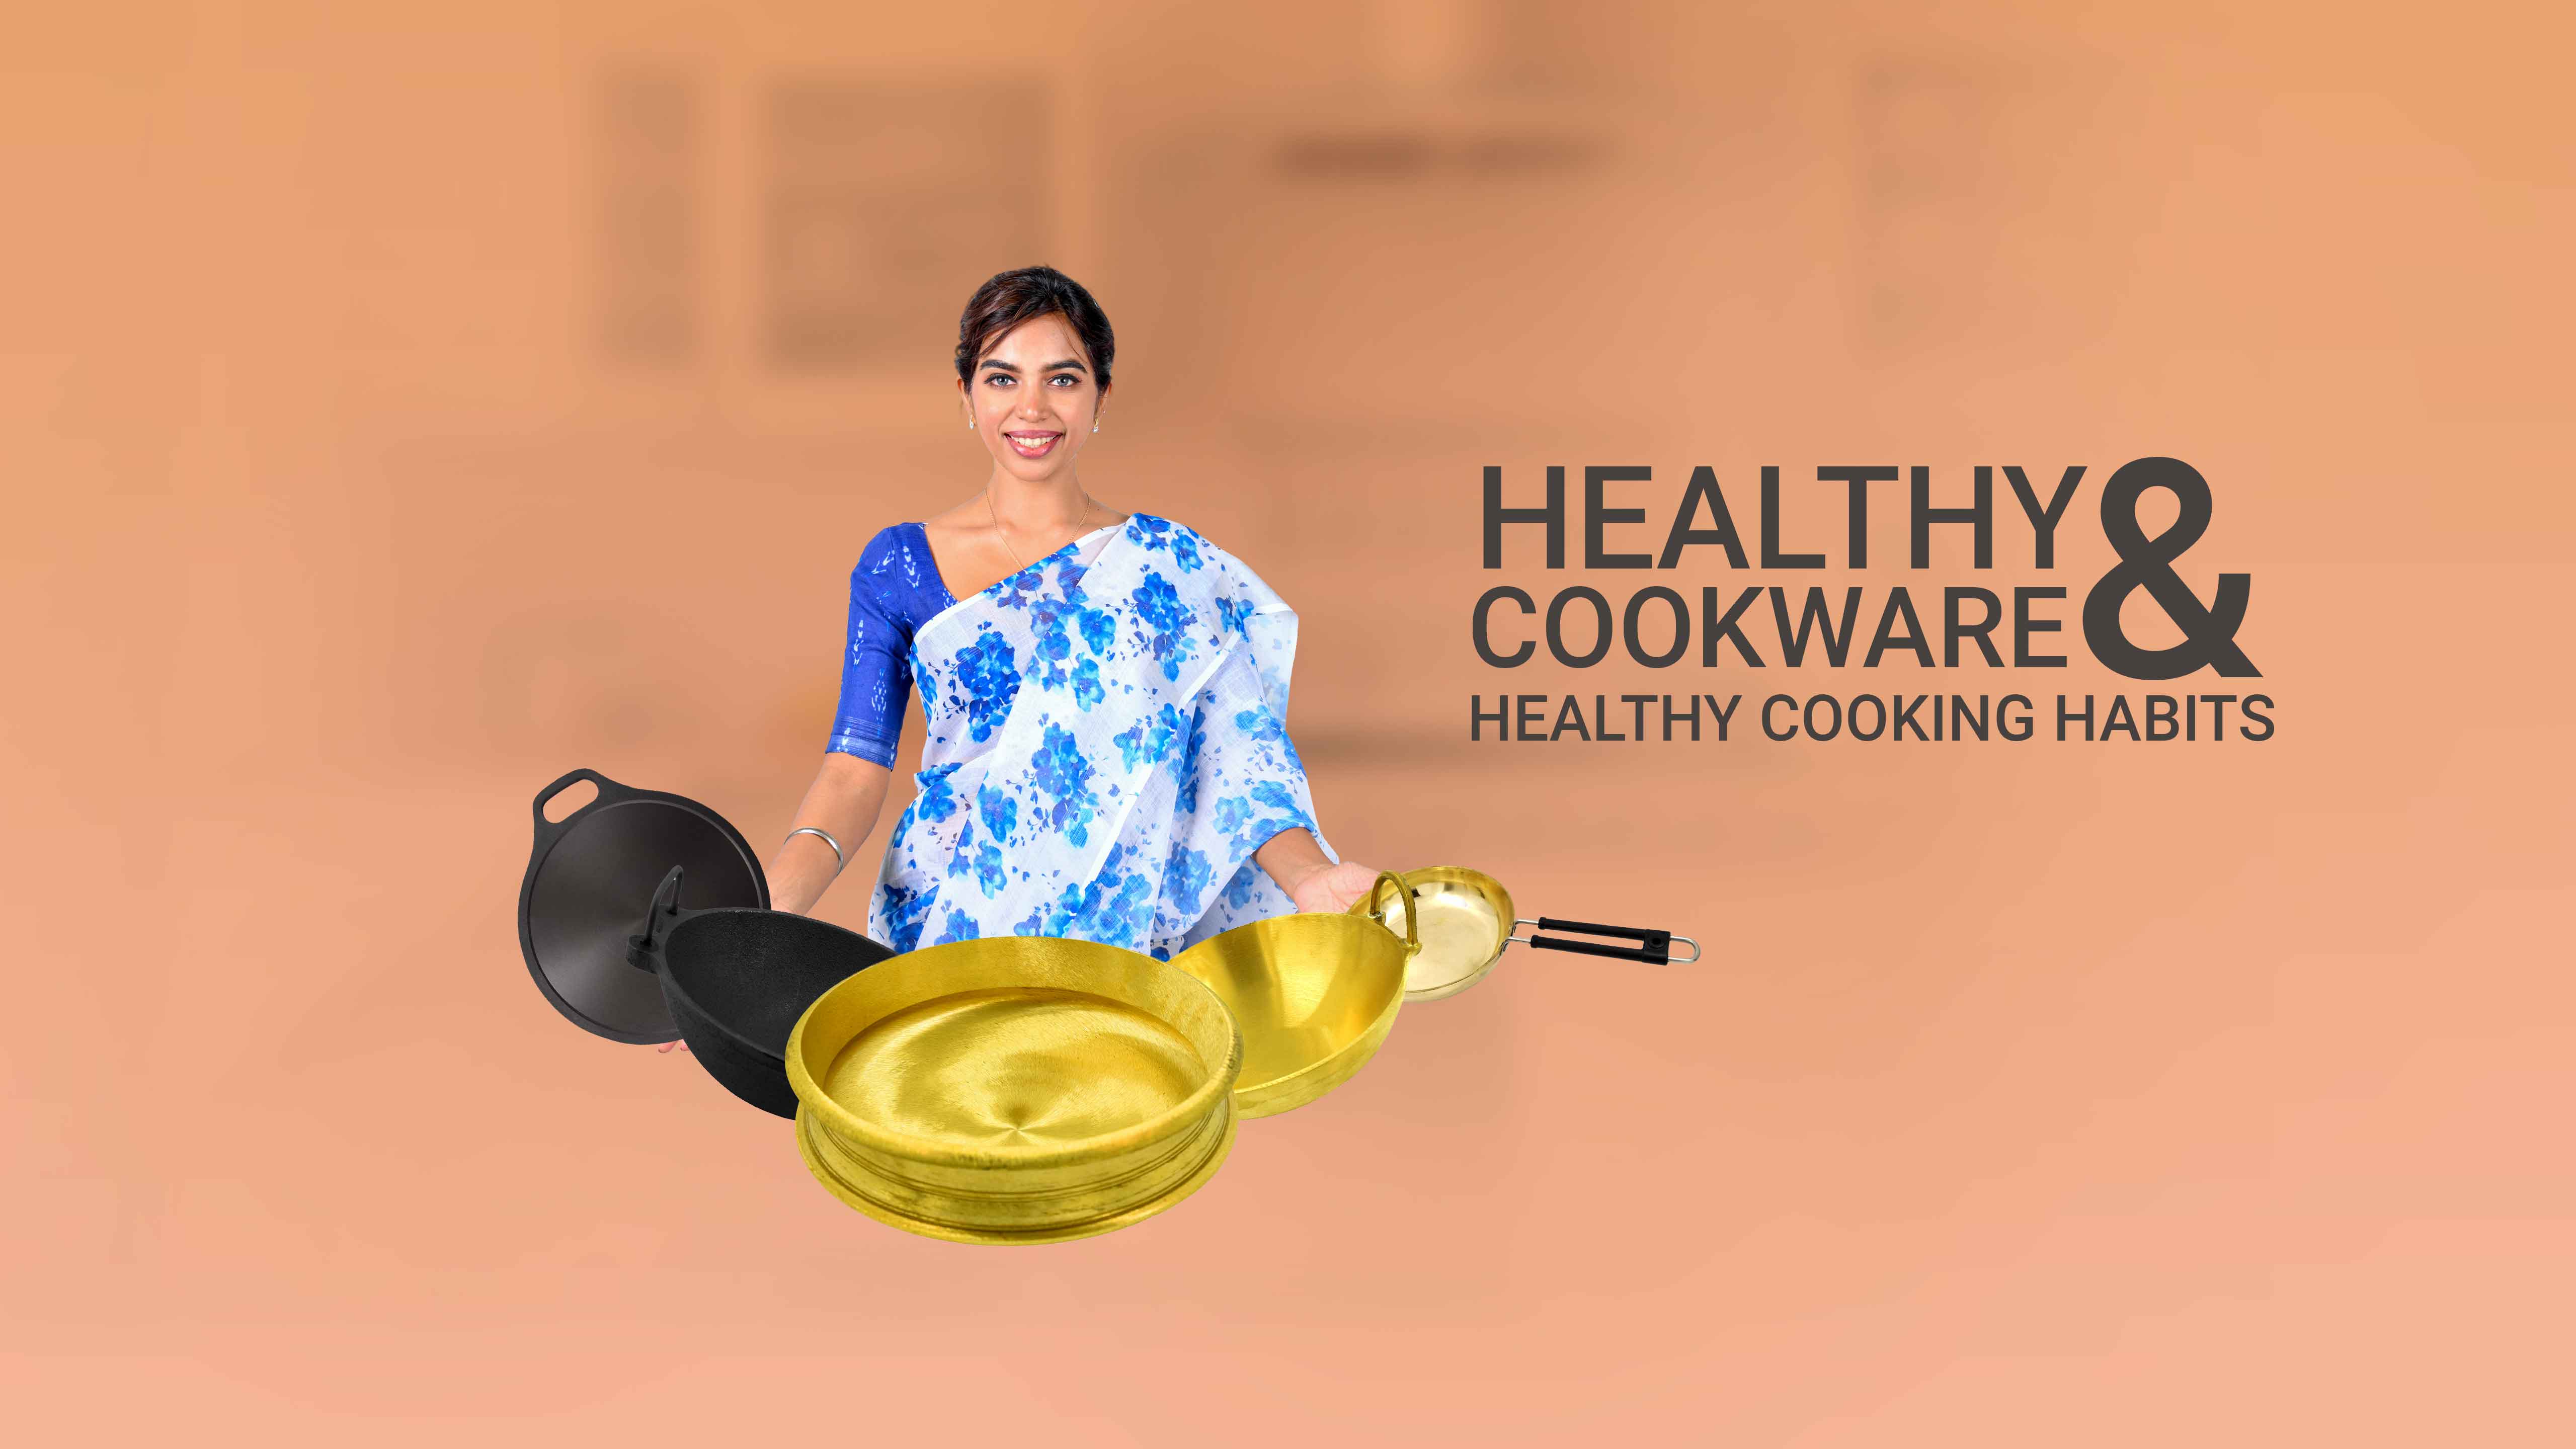 HEALTHY COOKWARE AND HEALTHY COOKING HABITS